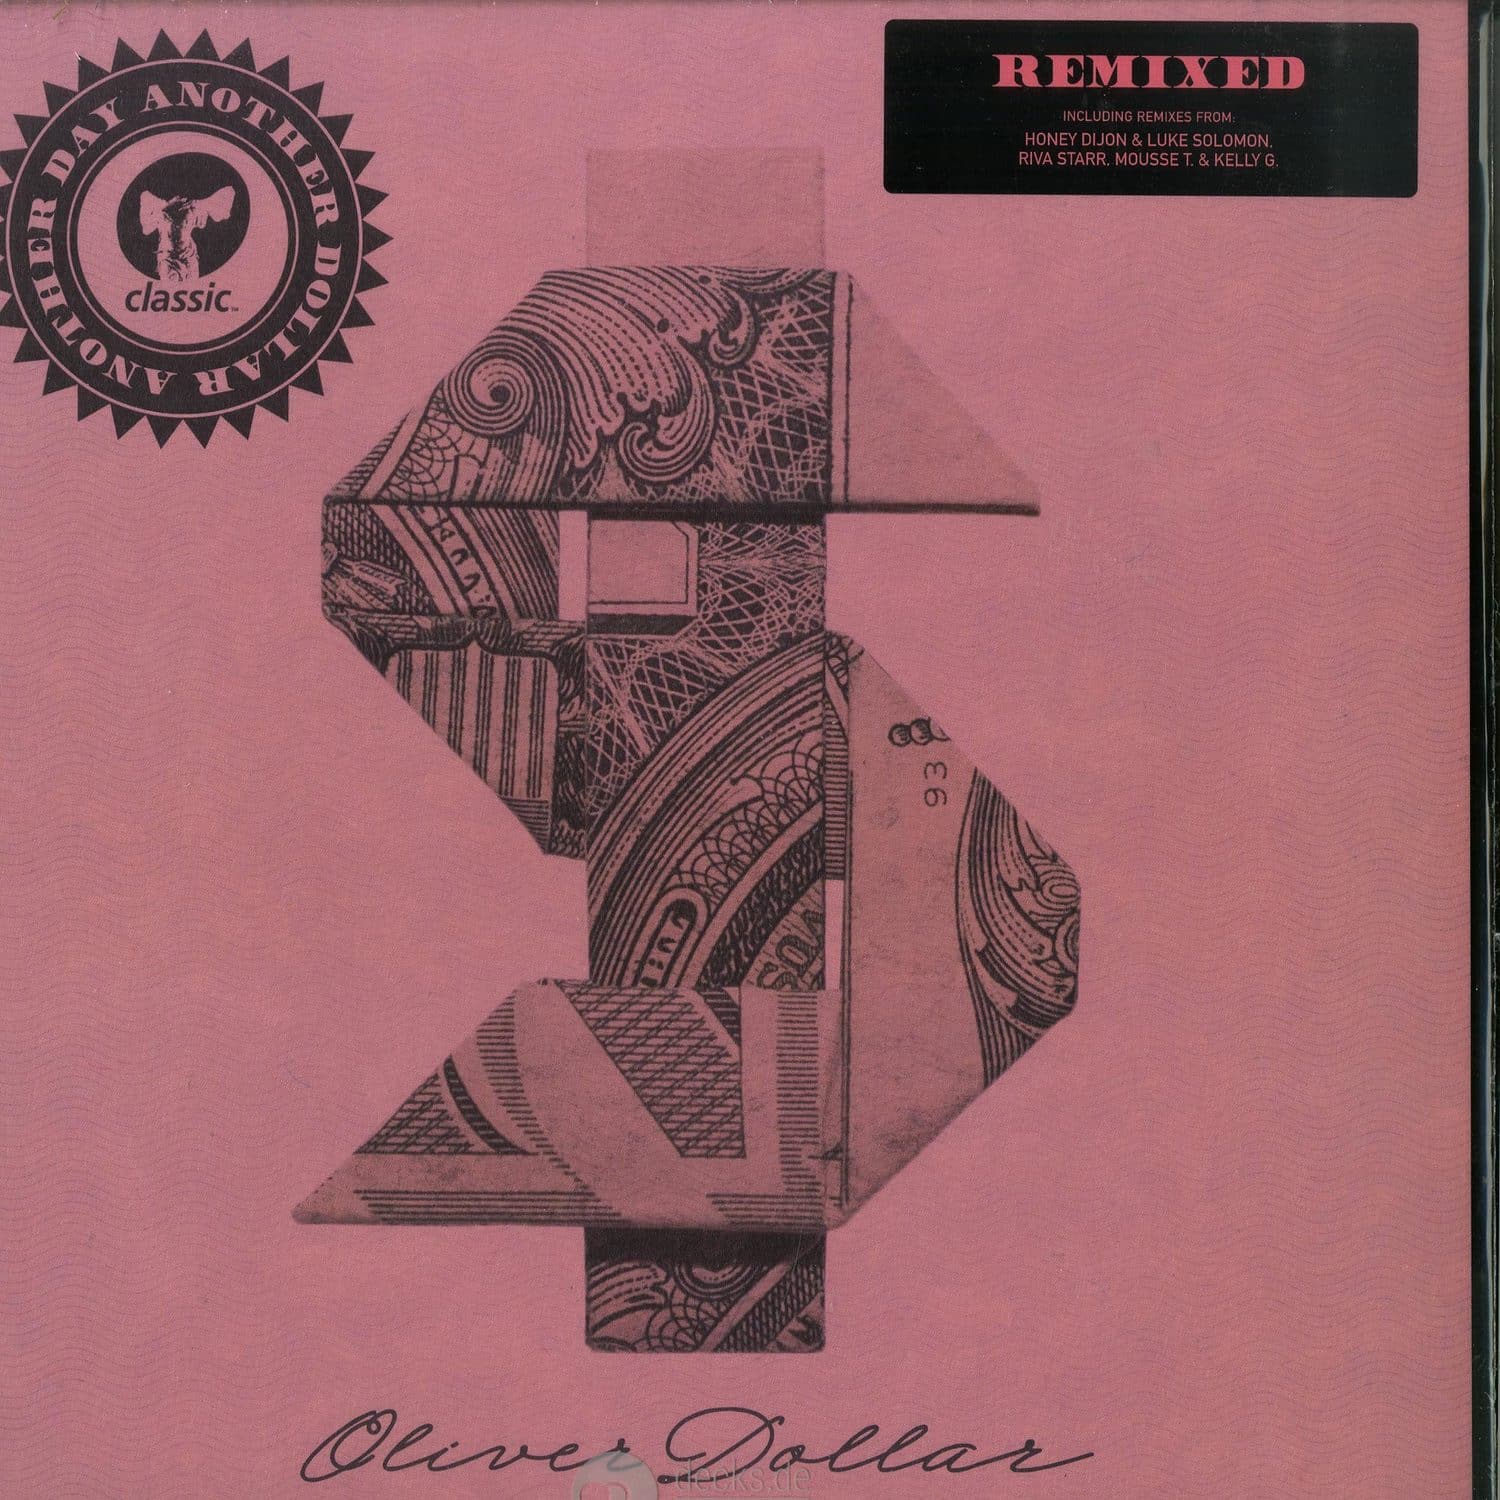 Oliver Dollar - ANOTHER DAY ANOTHER DOLLAR REMIXED 